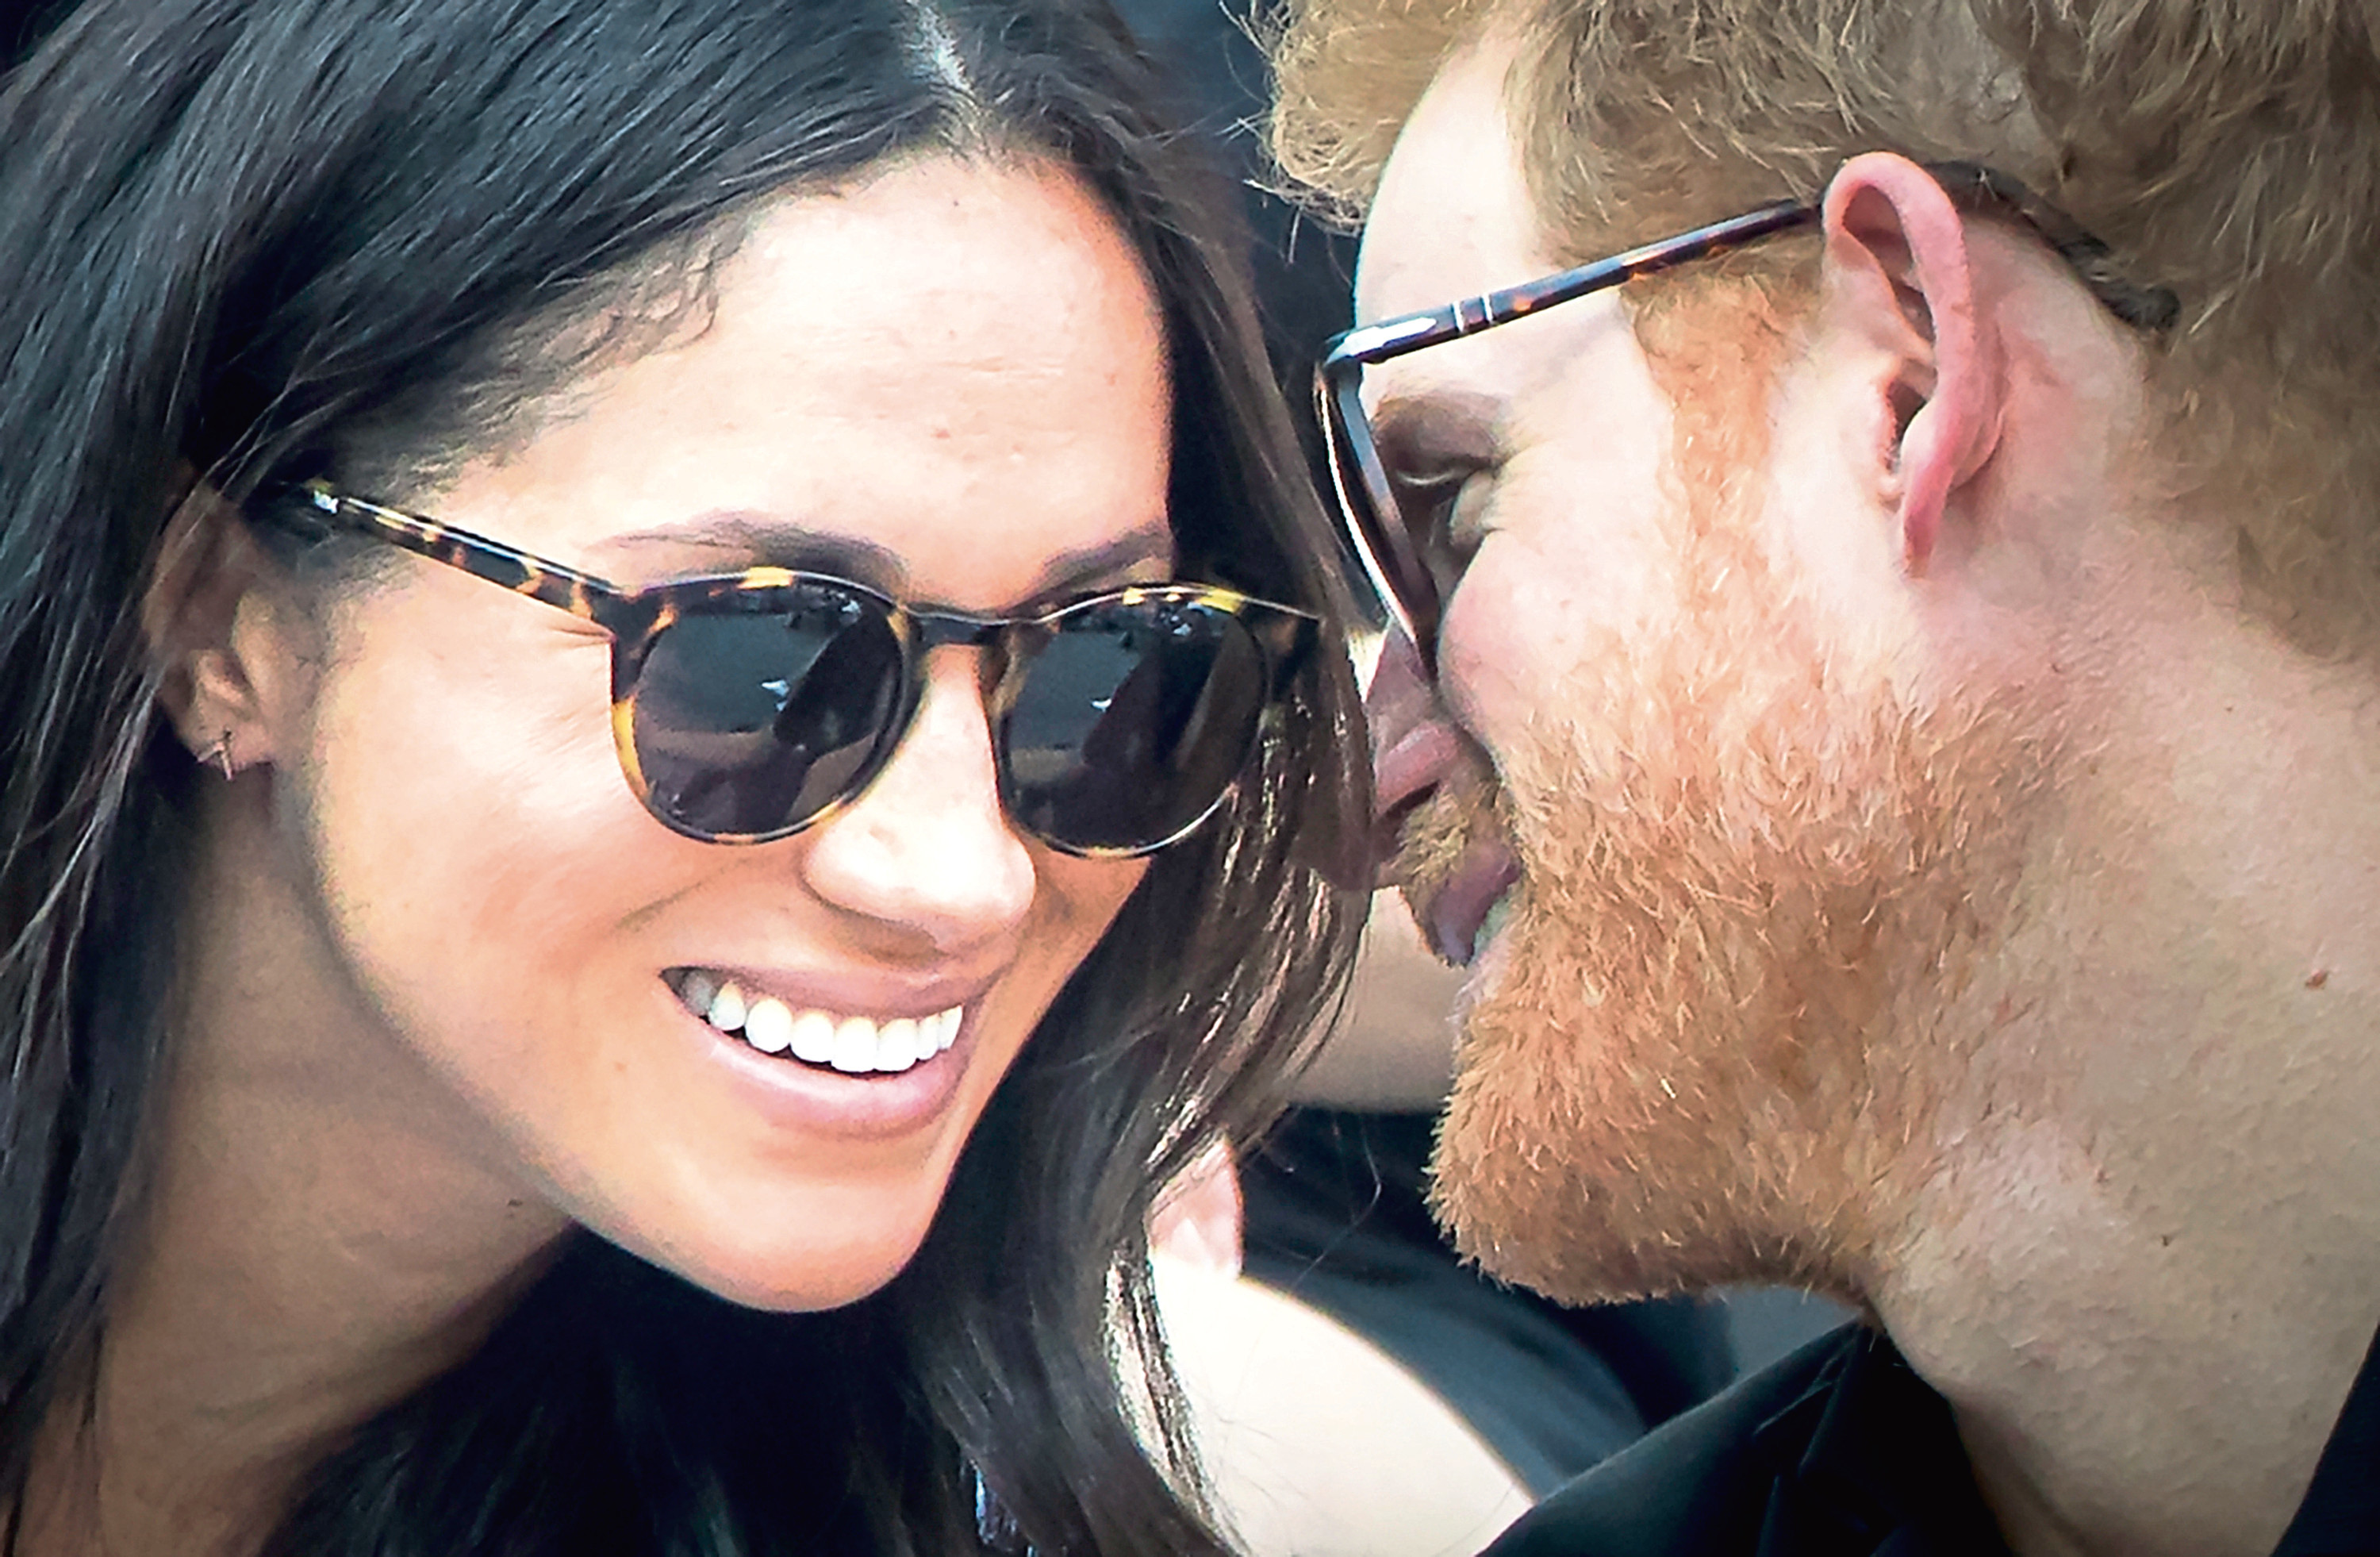 File photo dated 25/09/17 of Prince Harry and Meghan Markle at the 2017 Invictus Games in Toronto, Canada. For Prince Harry, it was fate he met and fell in love with Meghan Markle - thanks to a mystery mutual friend who organised their blind date.PRESS ASSOCIATION Photo. Issue date: Sunday May 6, 2018. Despite being from different backgrounds, the grandson of the Queen and the US actress clicked and their romance quickly developed into love. See PA story ROYAL Wedding Romance. Photo credit should read: Danny Lawson/PA Wire